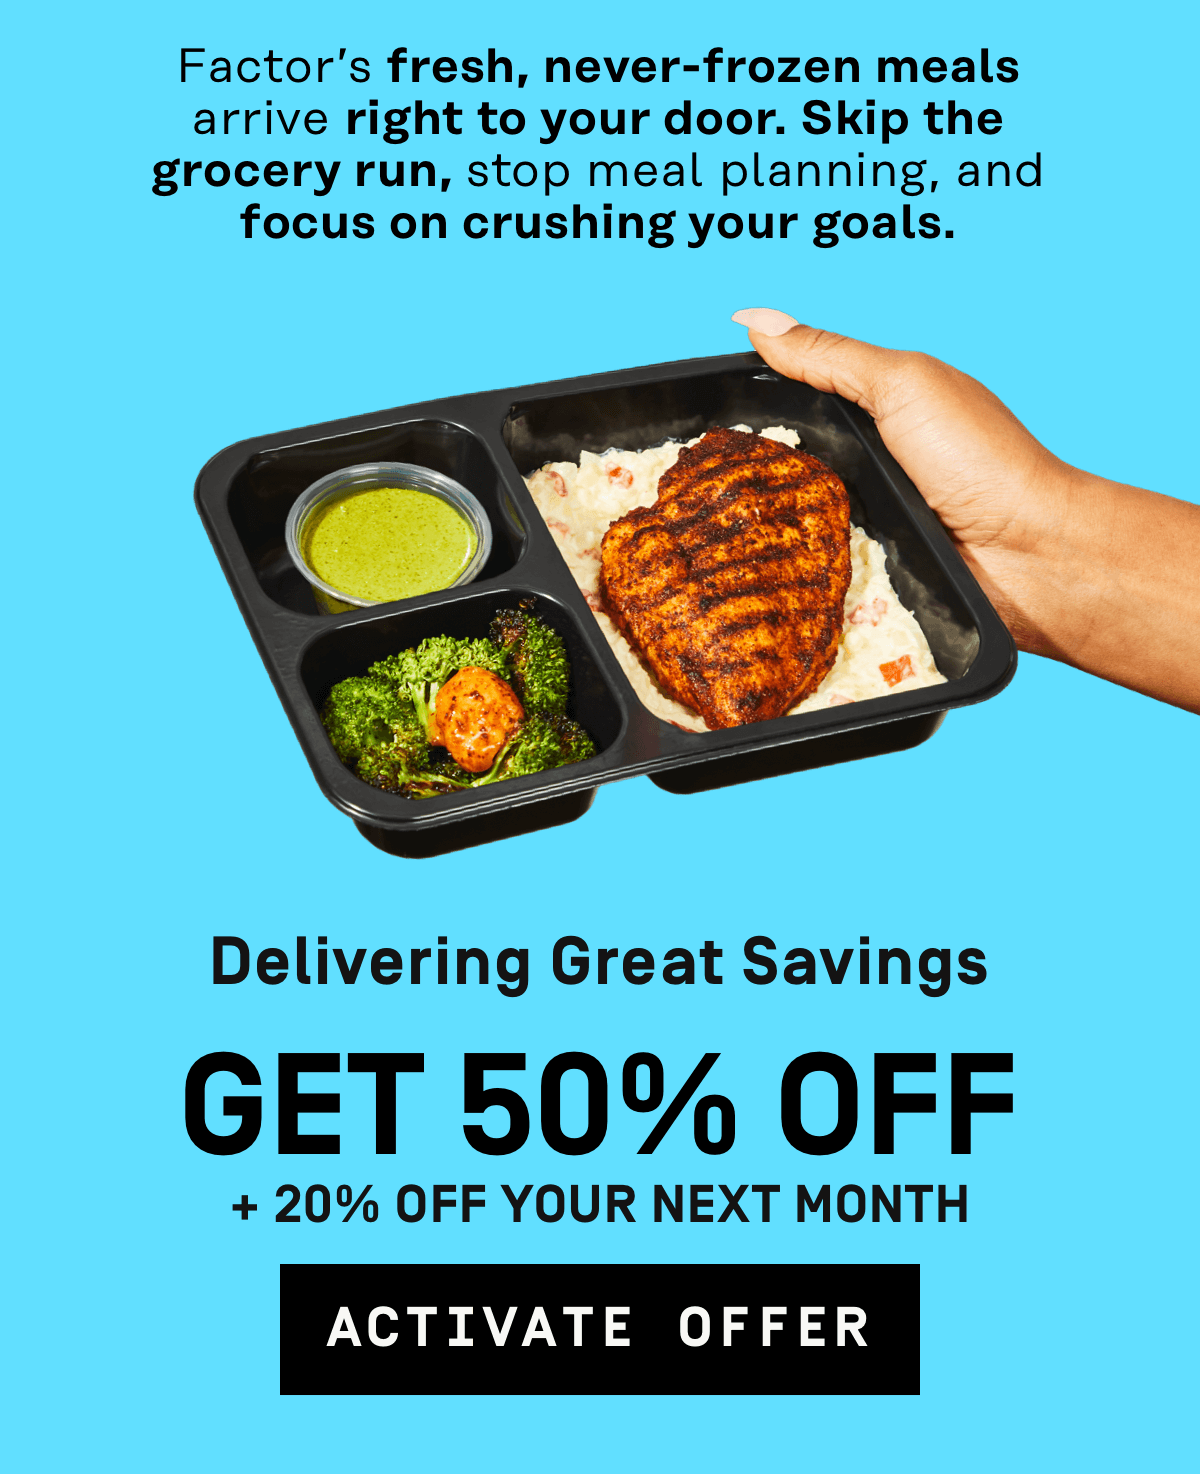 Factor's fresh, never-frozen meals arrive right to your door. Skip the grocery run, stop meal planning Get 50% Off + 20% Off your next month